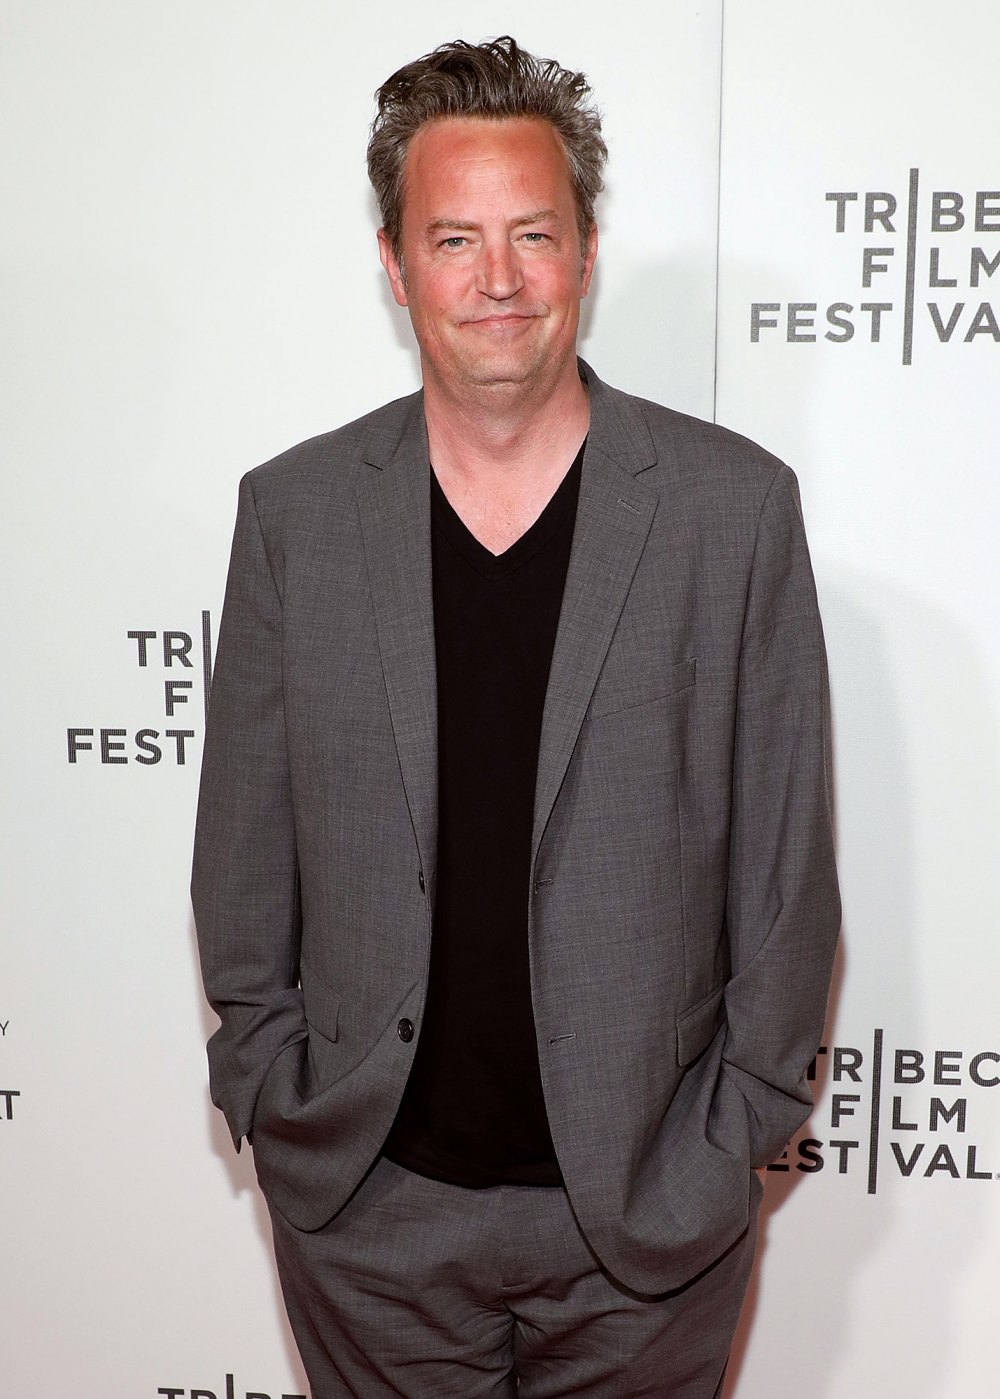 Matthew Perry Wrote About Receiving Ketamine Treatments to ‘Help With Depression’ Before Death